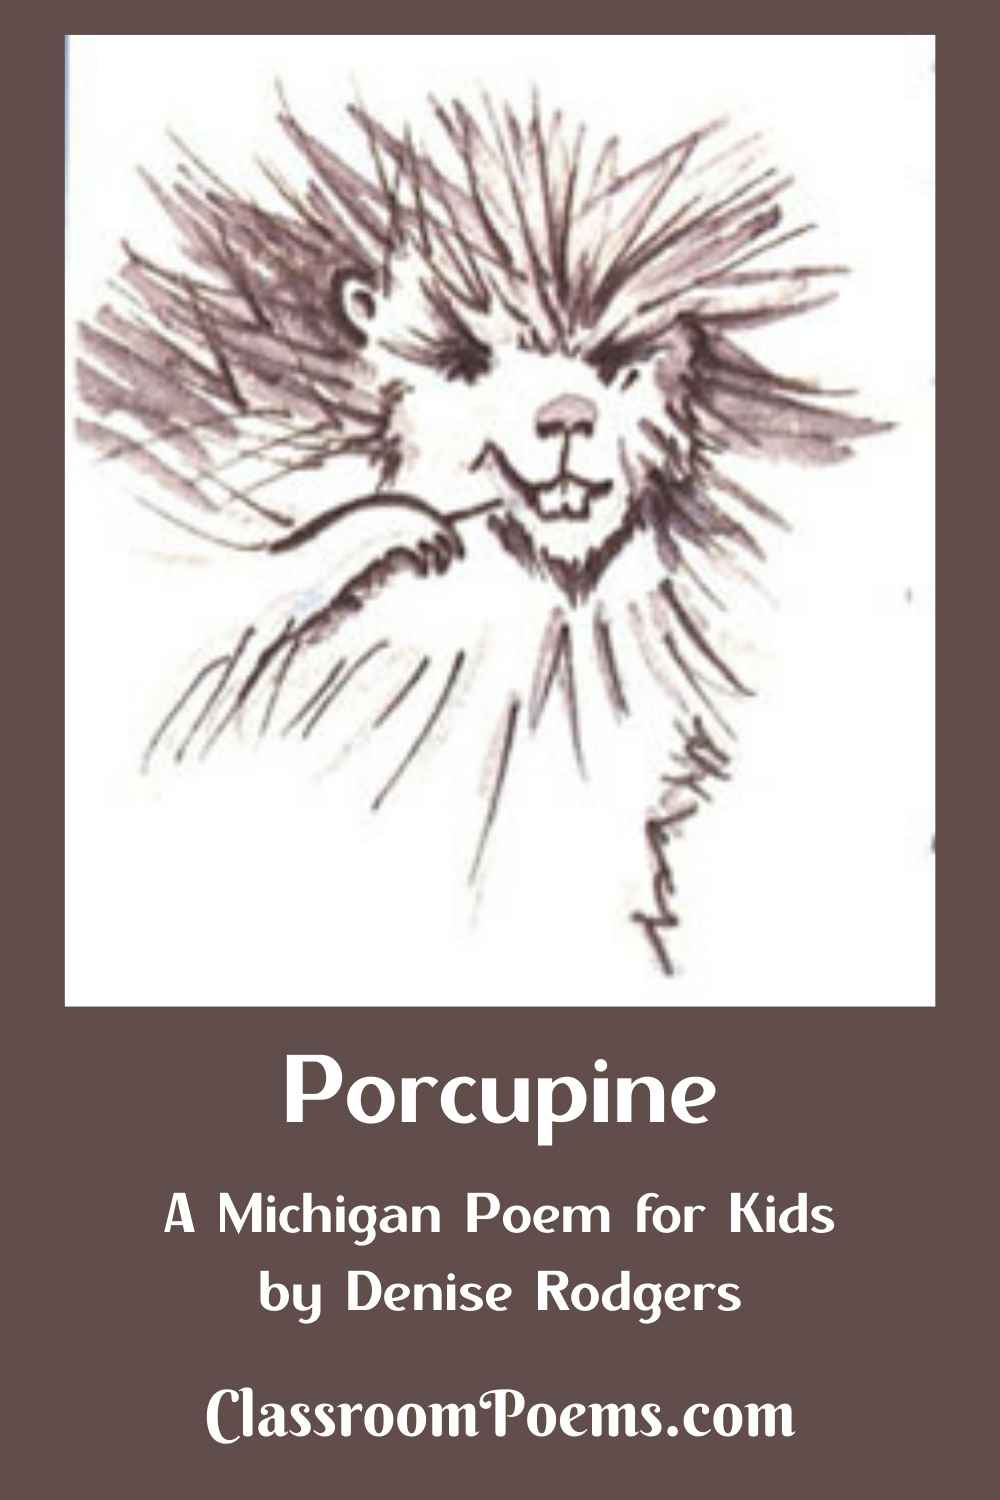 PORCUPINE drawing and poem by Denise Rodgers on ClassroomPoems.com.